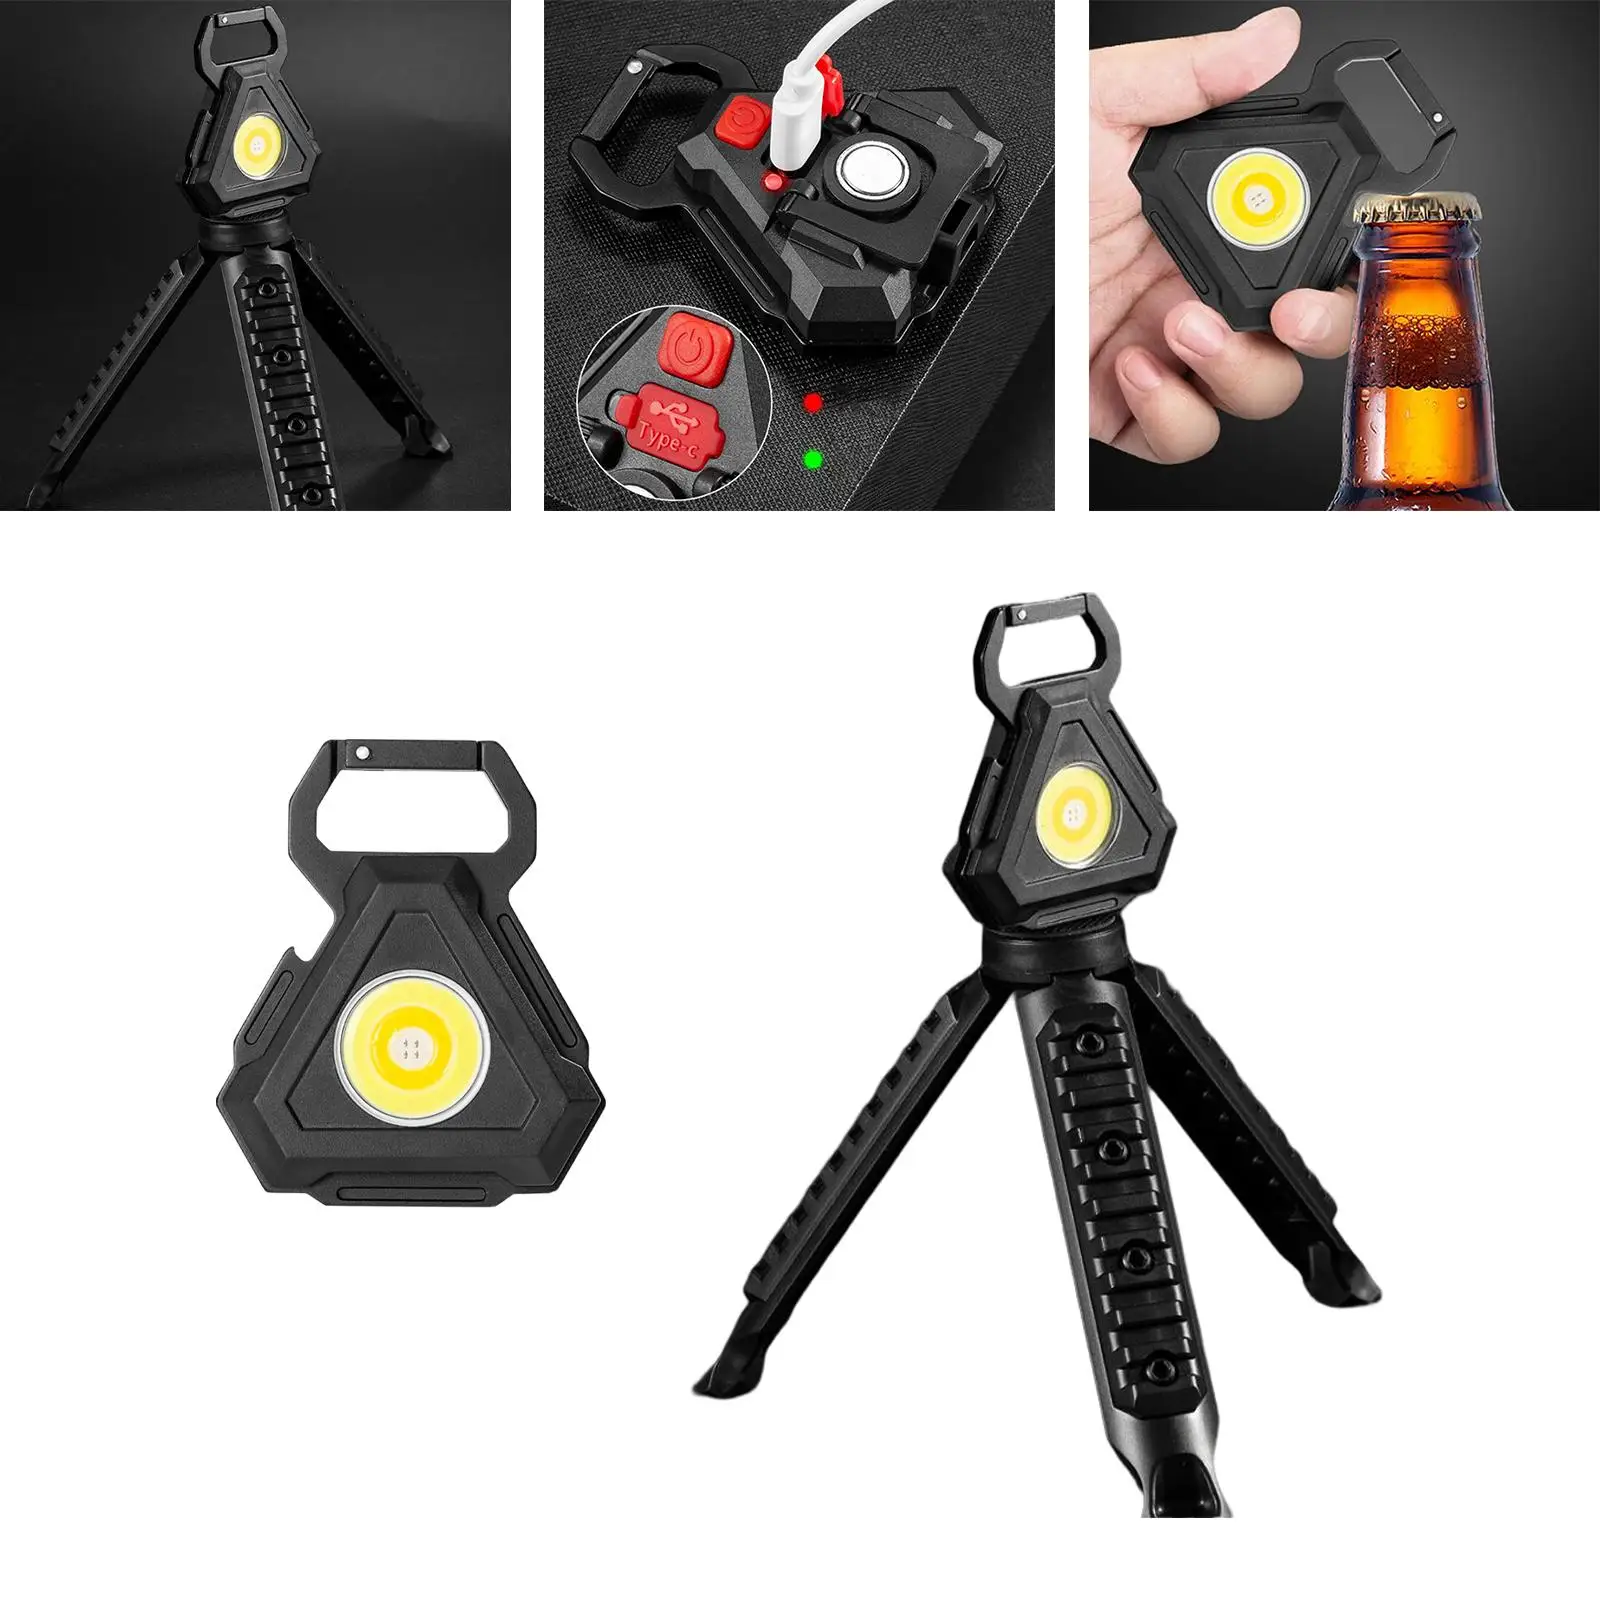 COB Flashlight Keychain Torch Pocket Light Rechargeable 500 Lumens Waterproof Lamp Work Light for Outdoor Camping Hiking Walking